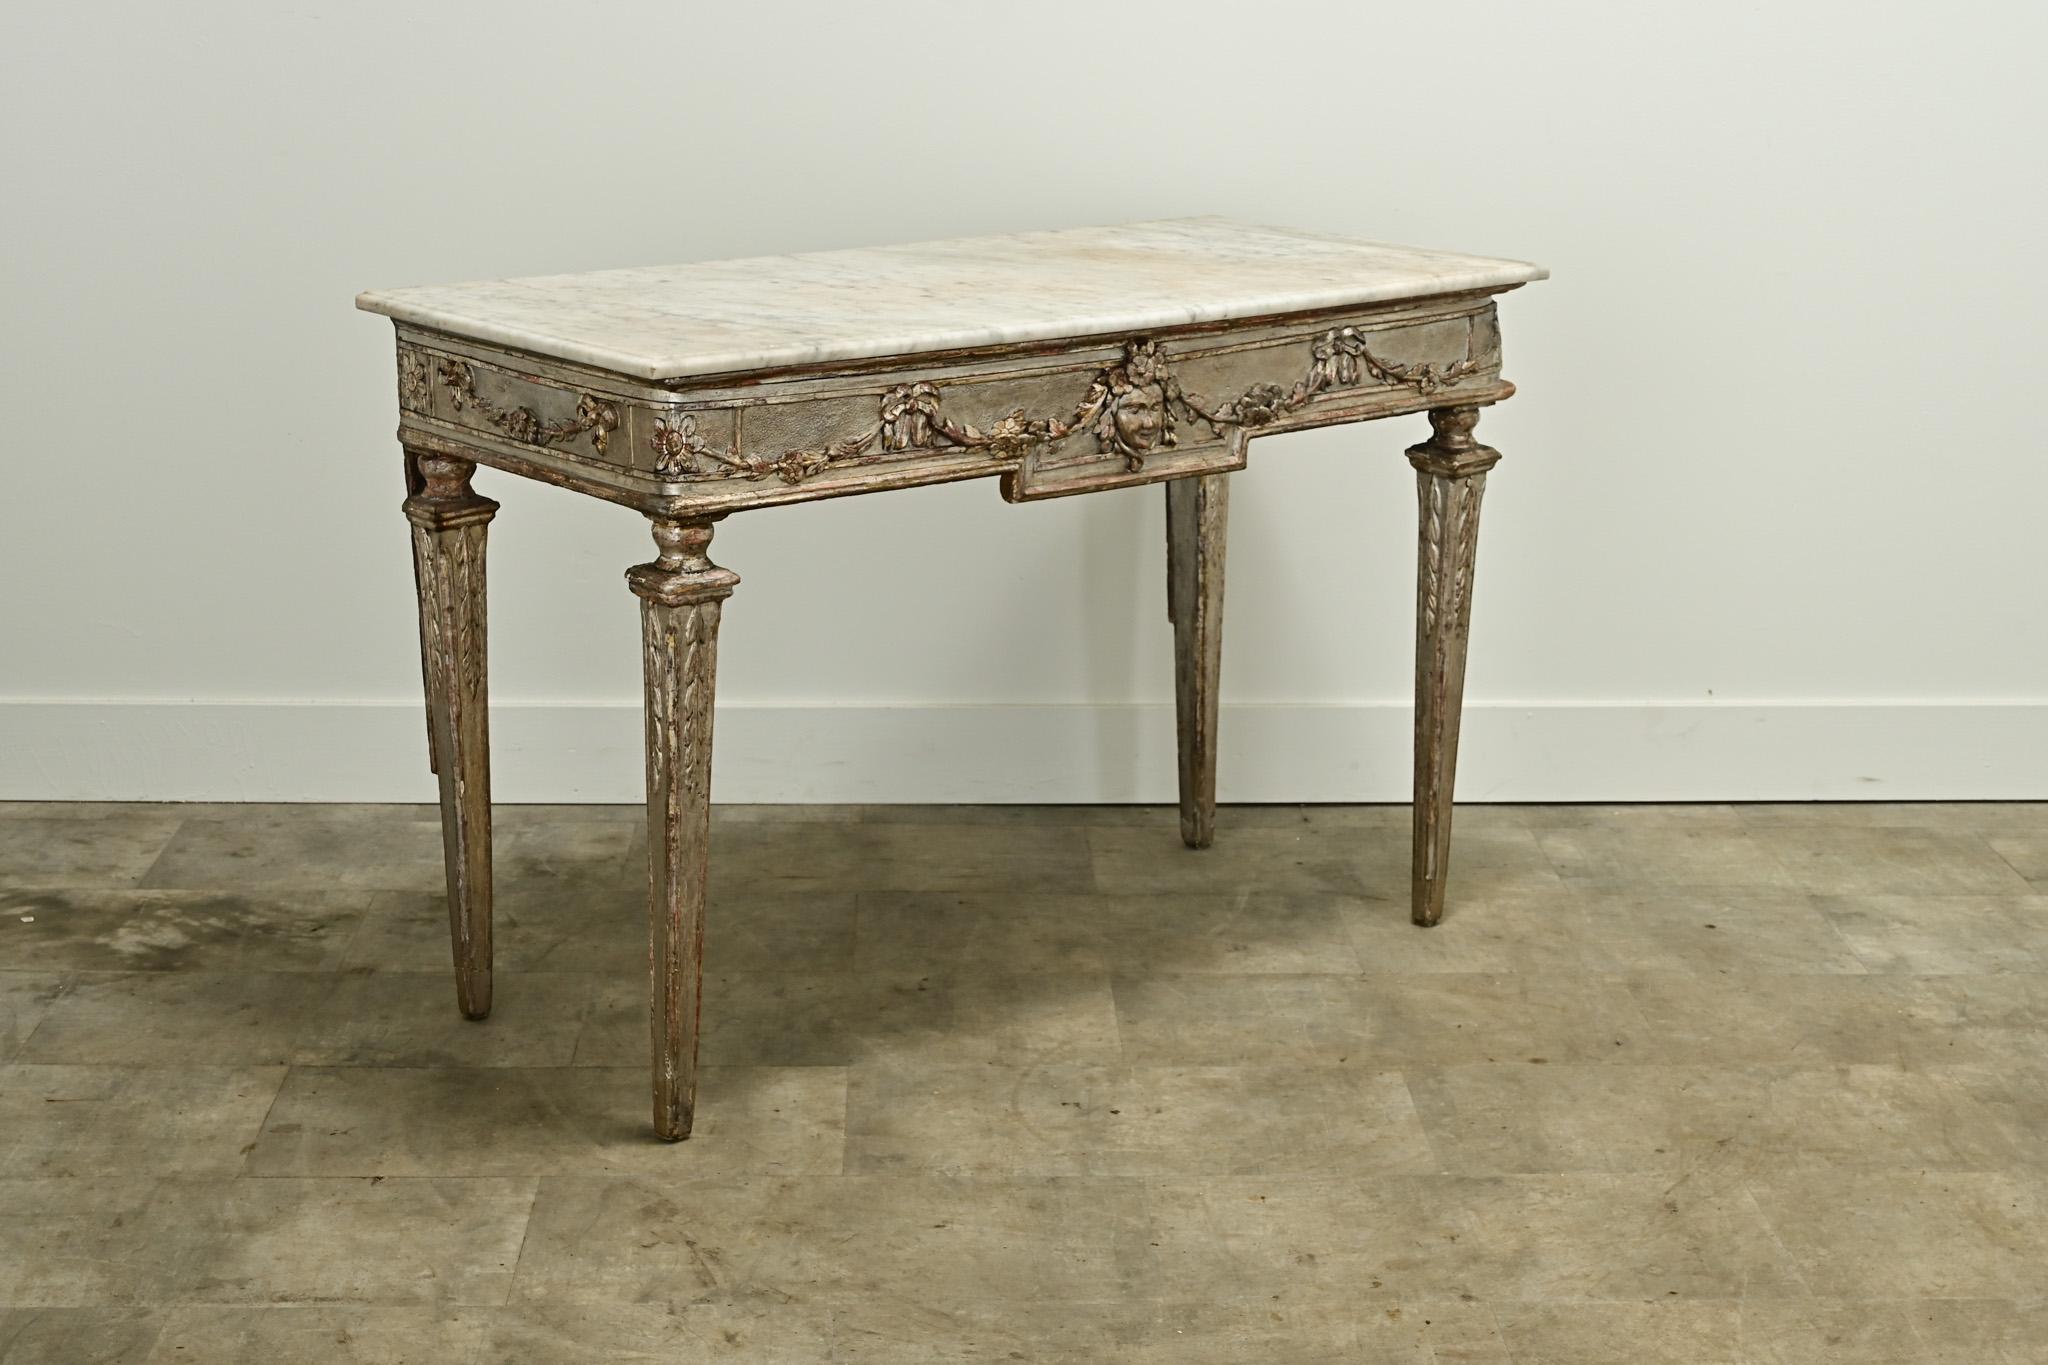 An impressive silver-gilt Italian console from the late 18th Century. The worn and patinated white marble top is smooth and makes for a durable surface. The base is hand carved with floral swags, bows and a cameo in the center. The legs are tapered